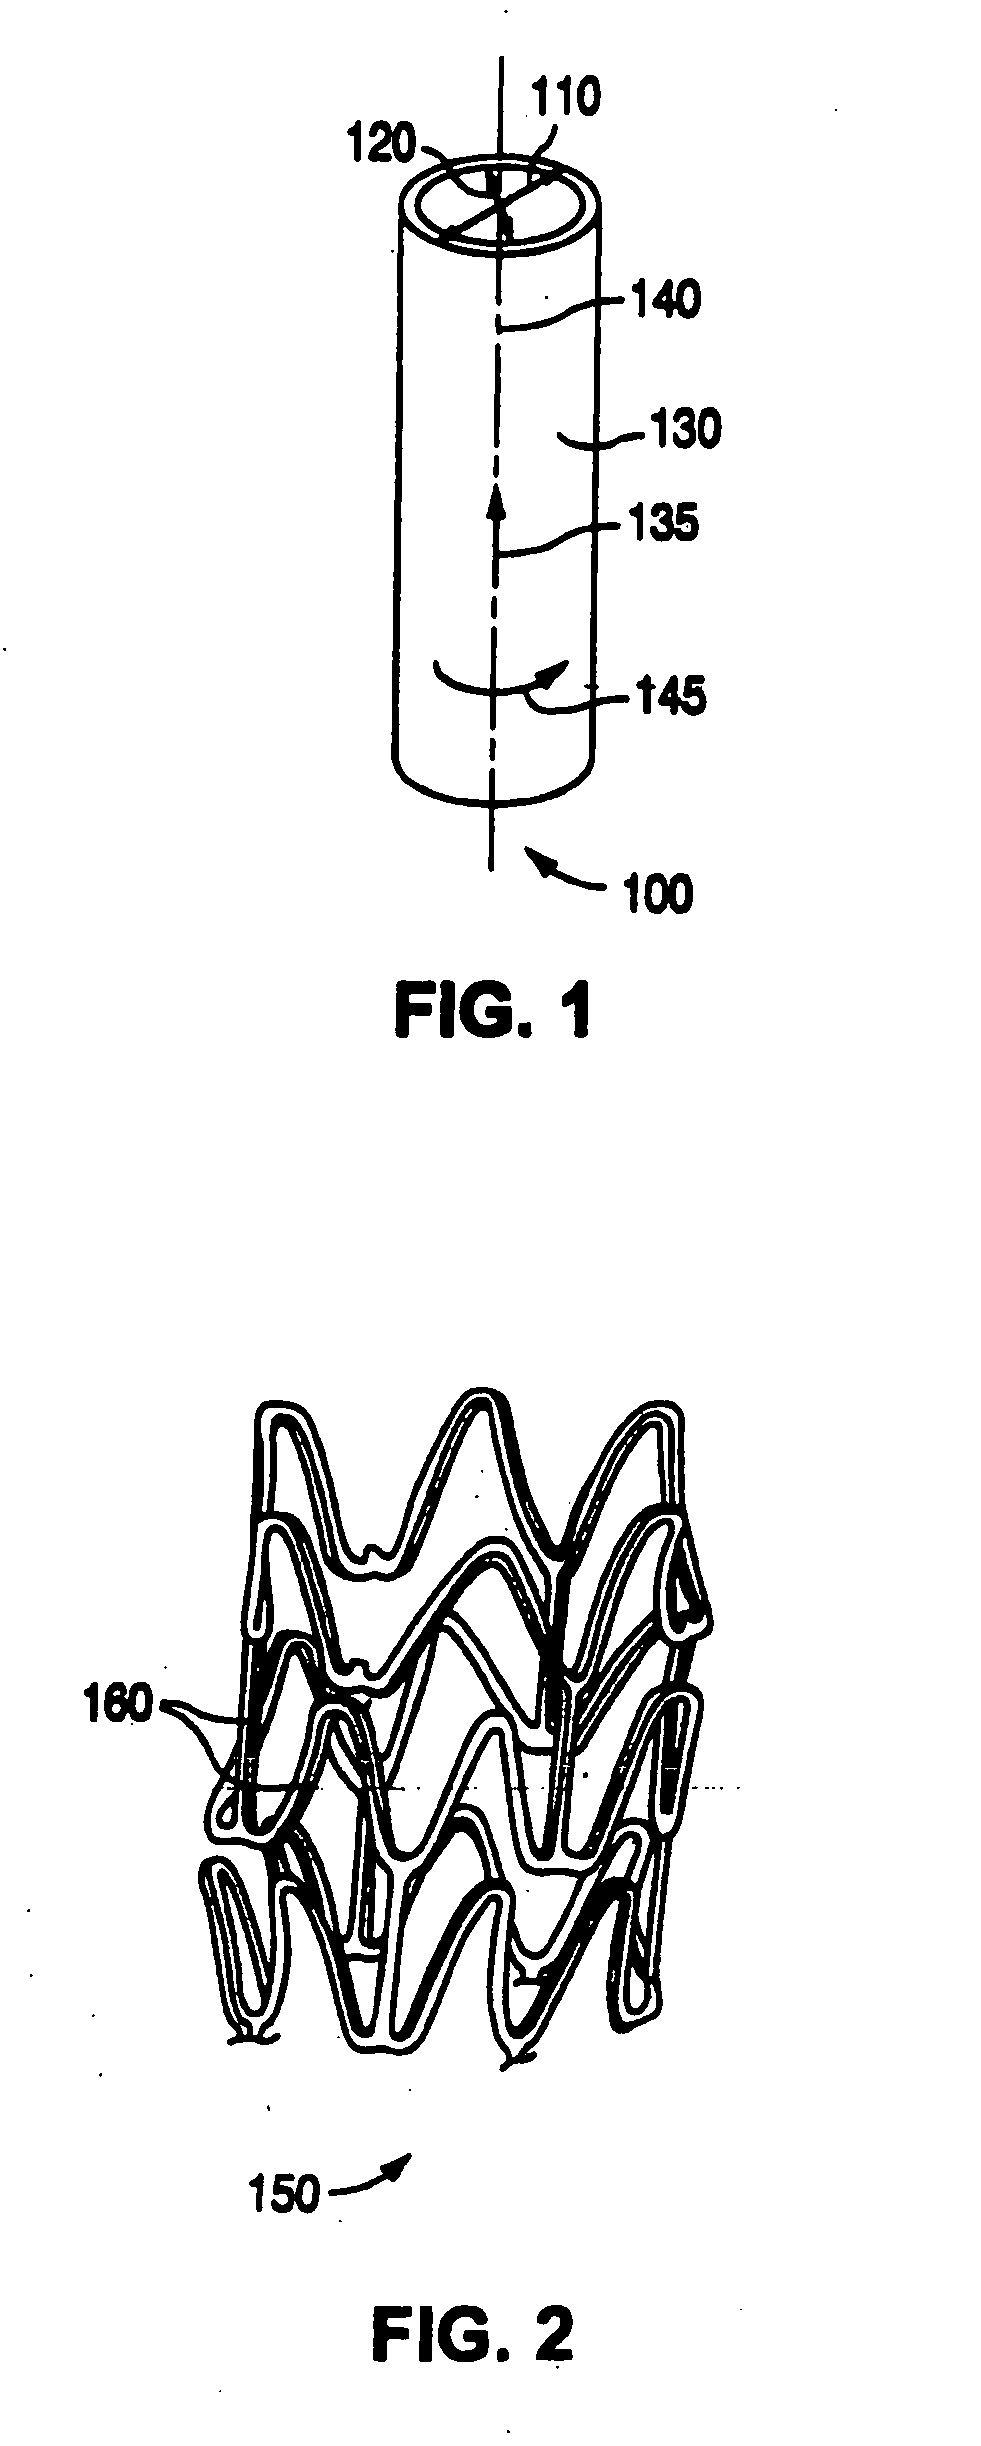 Method of fabricating a stent with features by blow molding